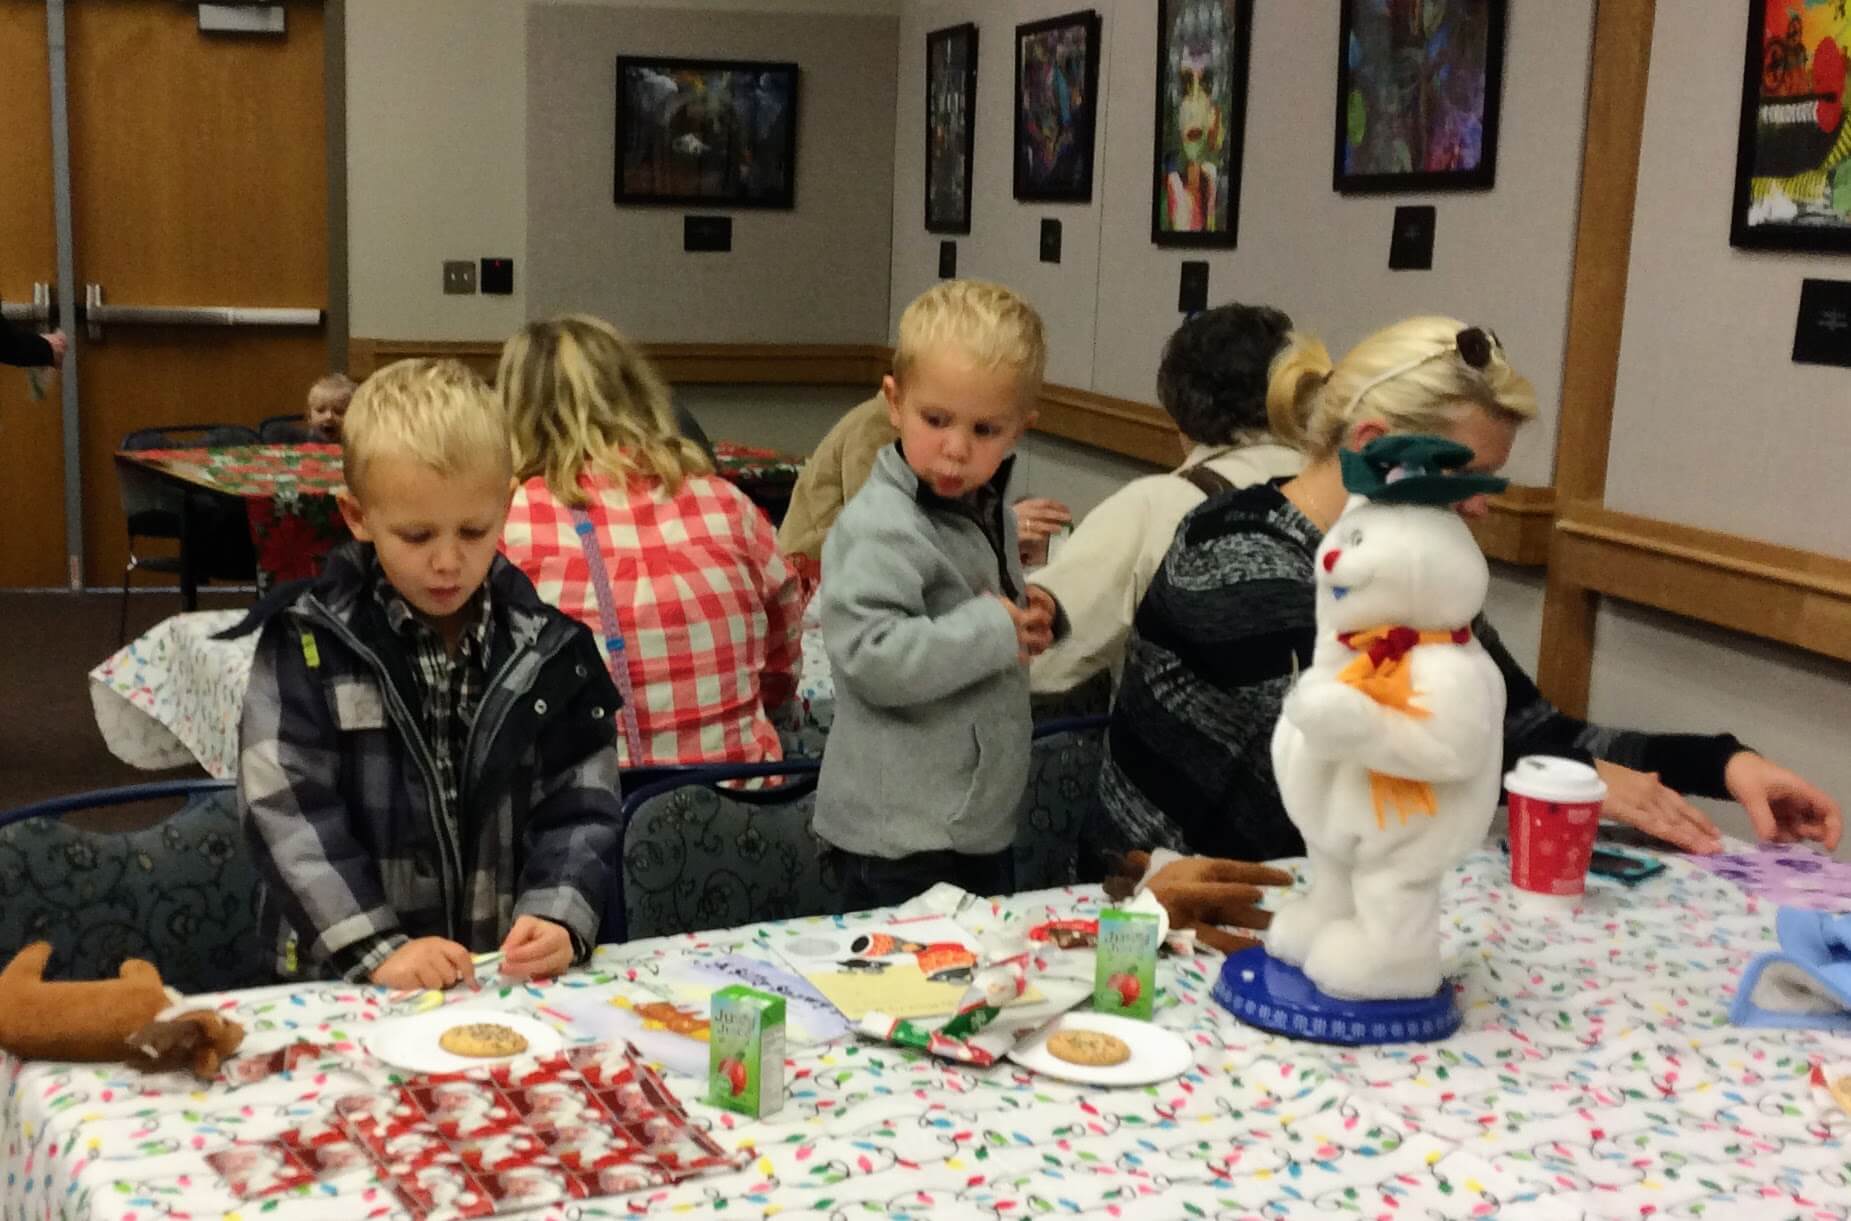 Families enjoyed cookies and juice after their visit with Santa